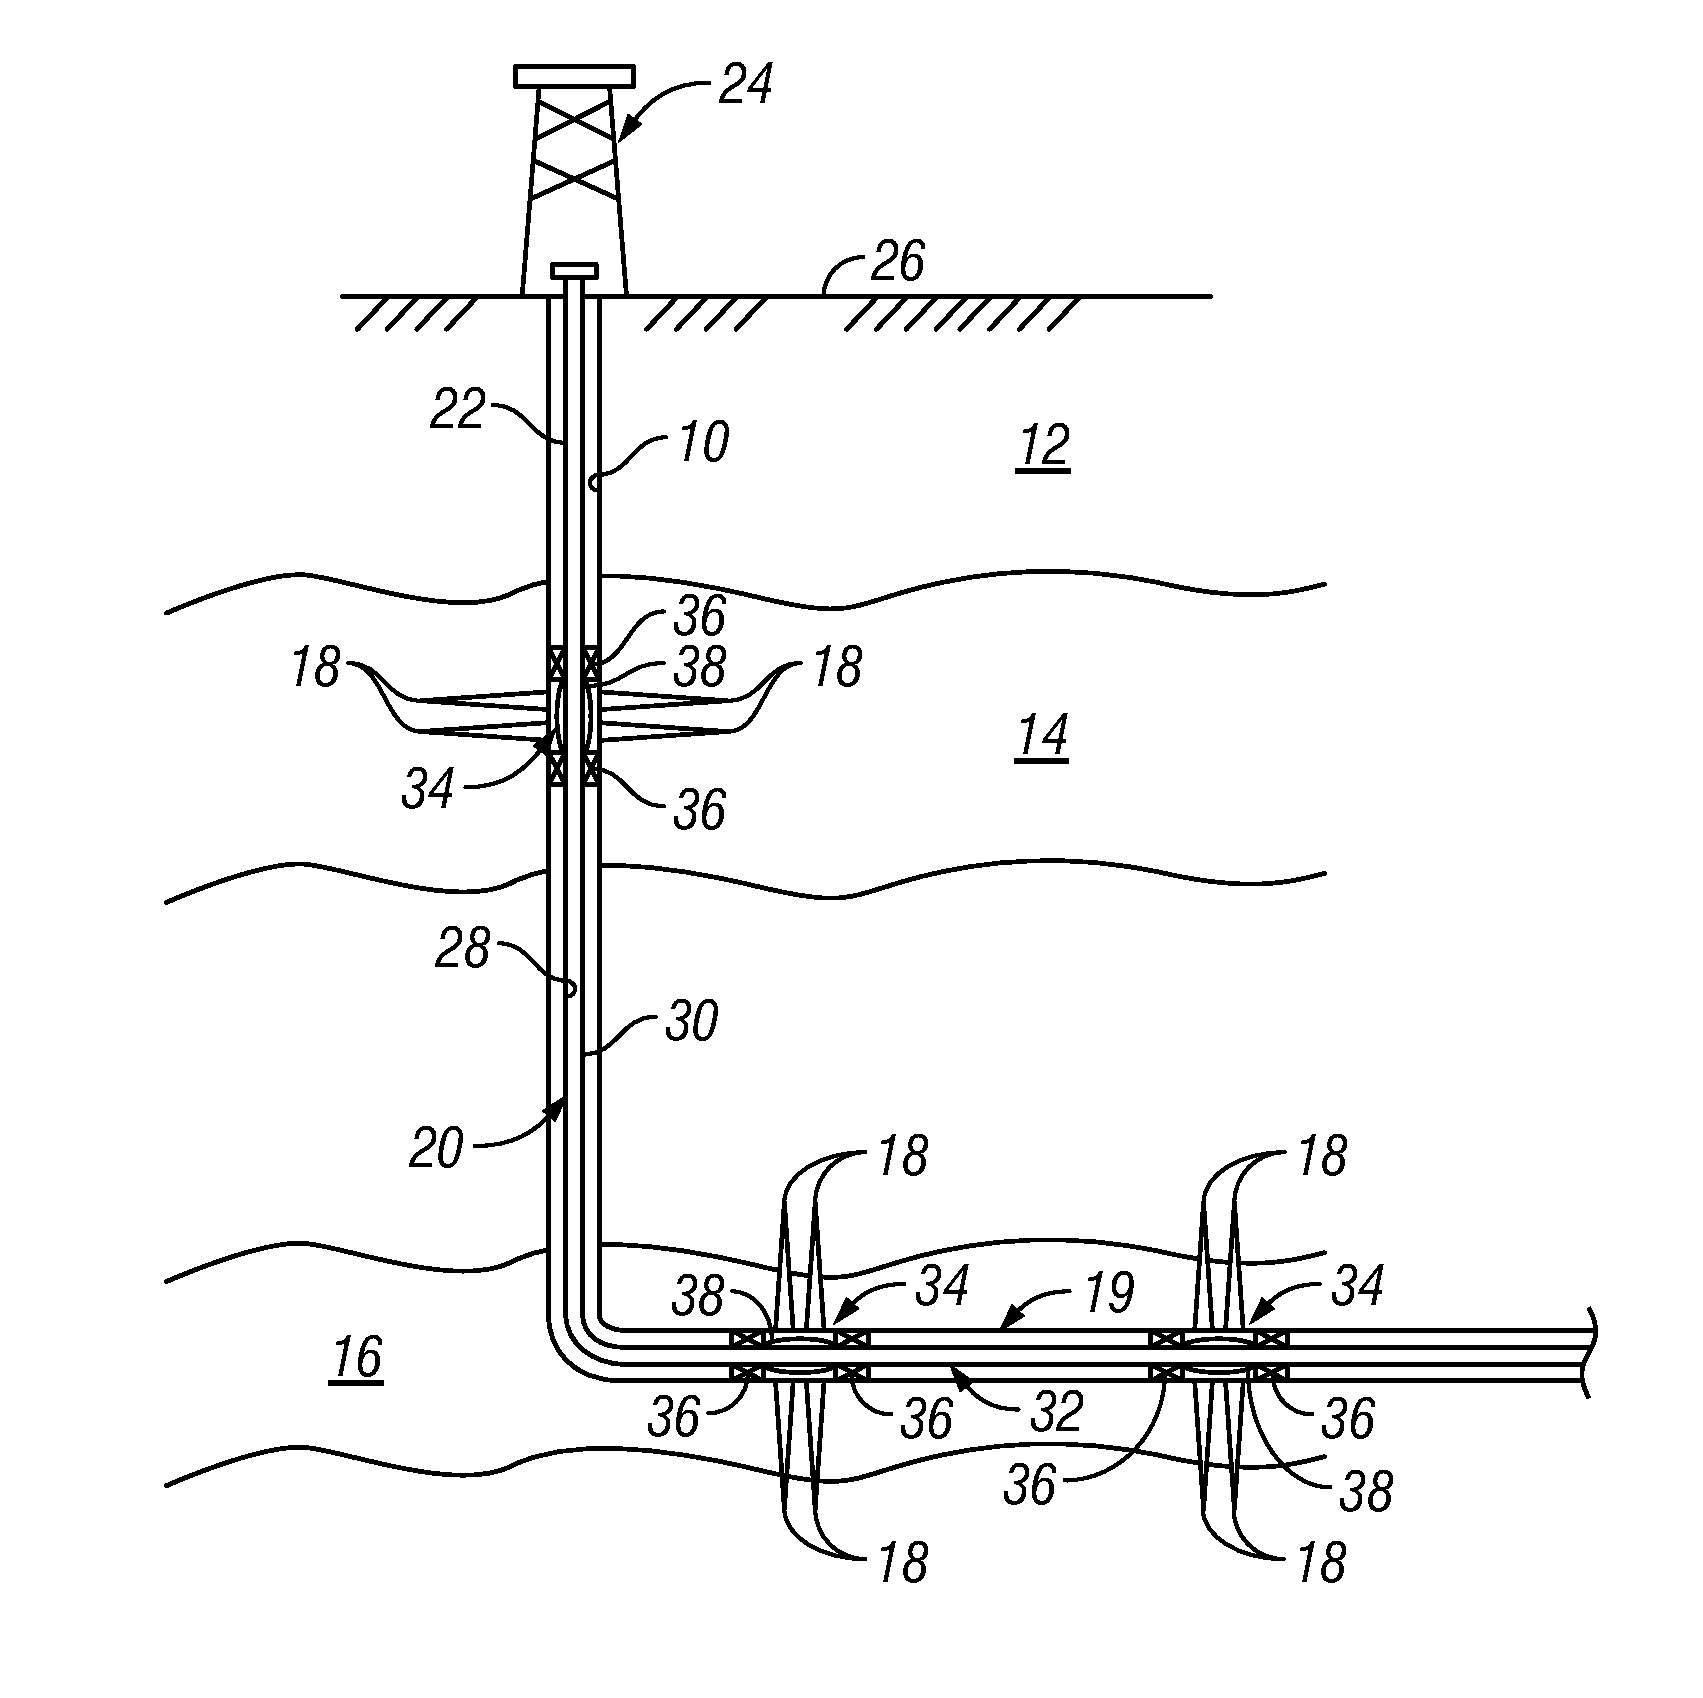 Flow control device with one or more retrievable elements